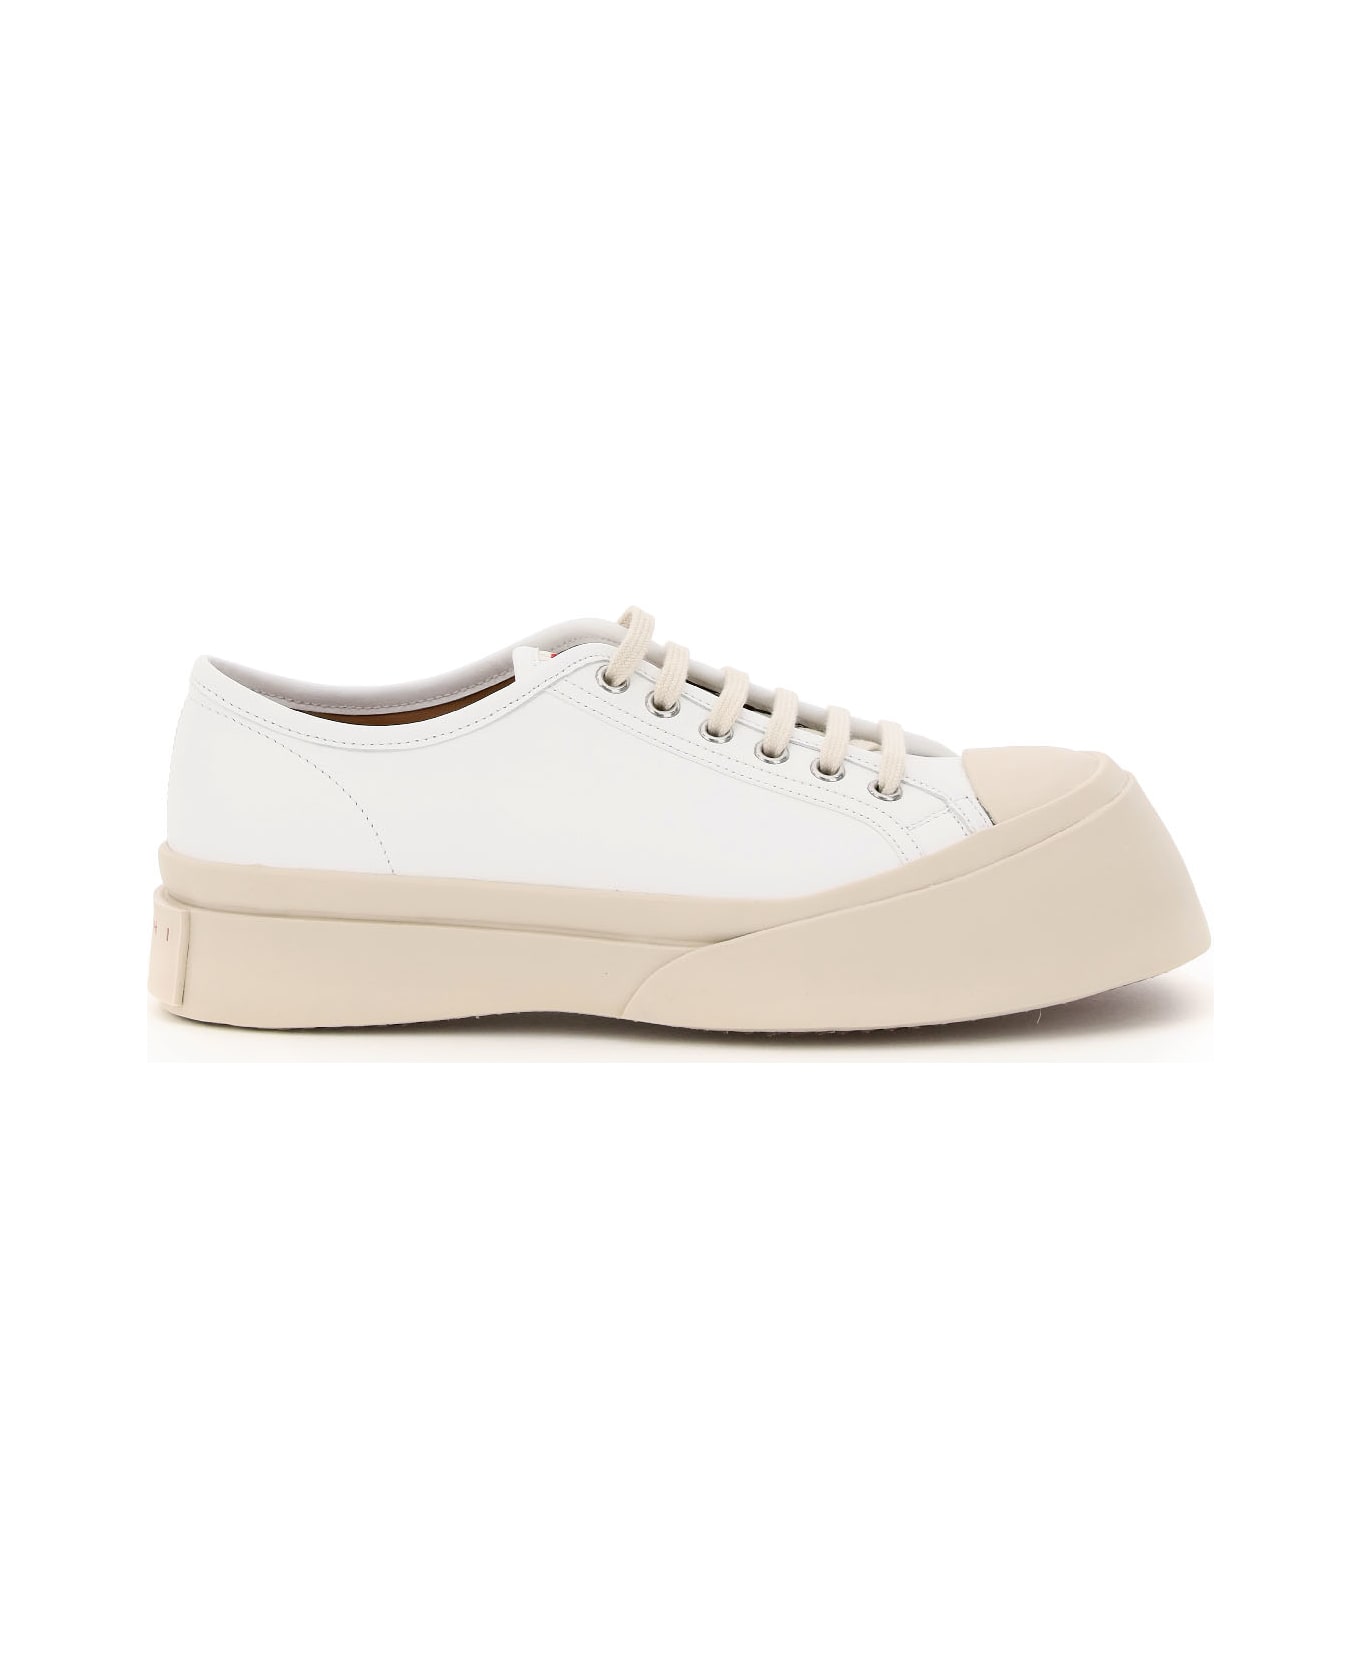 Marni Pablo Leather Sneakers - White スニーカー